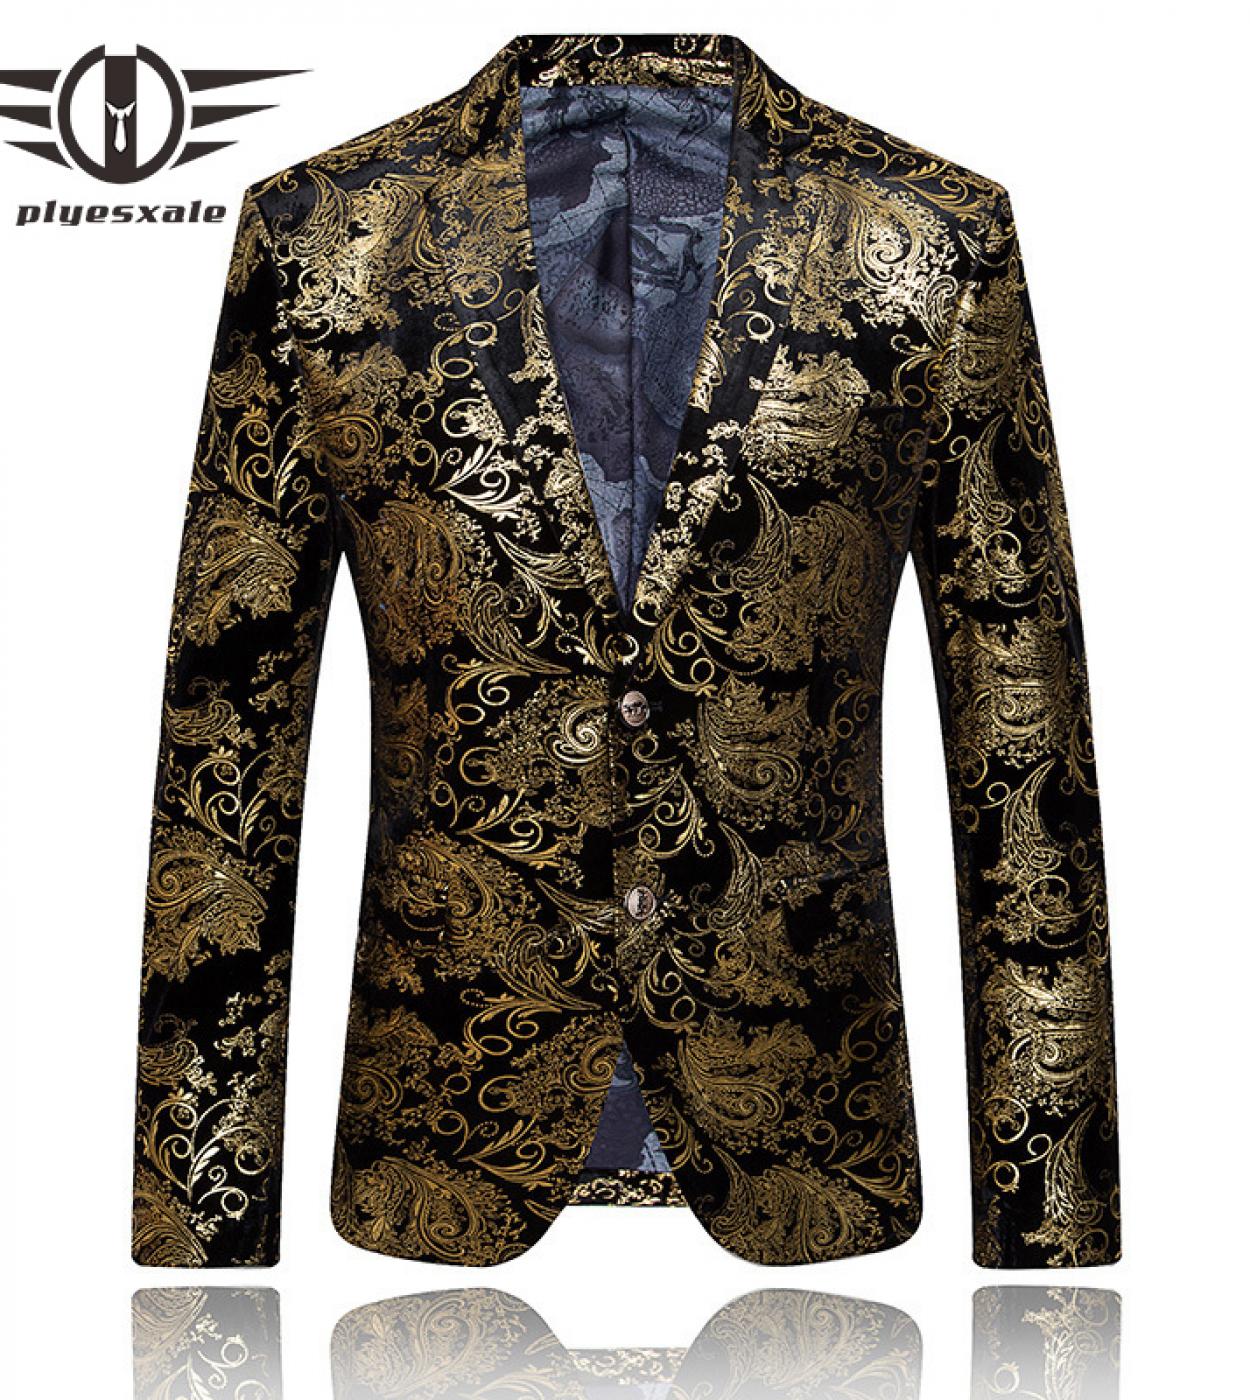 Plyesxale Gold Blazer For Men Luxury Brand Mens Embroidered Blazer Stage Costumes For Singers Slim Fit Wedding Prom Blaz